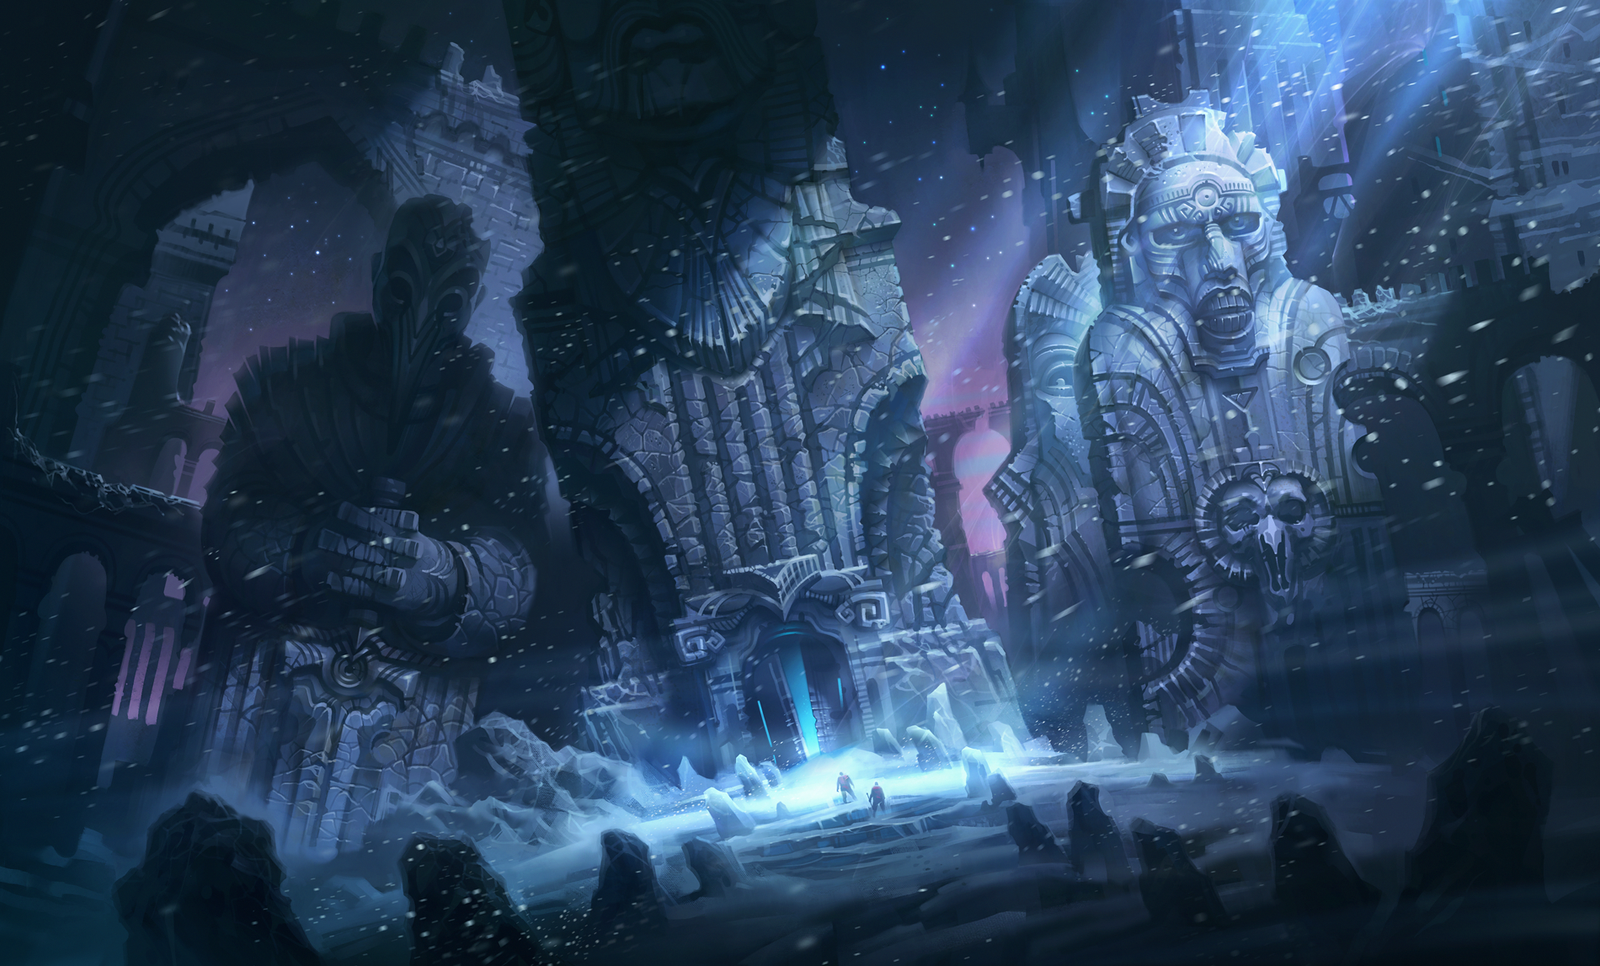 at_the_mountains_of_madness_2_howard_lovecraft_by_ivany86-d6j5qun.png